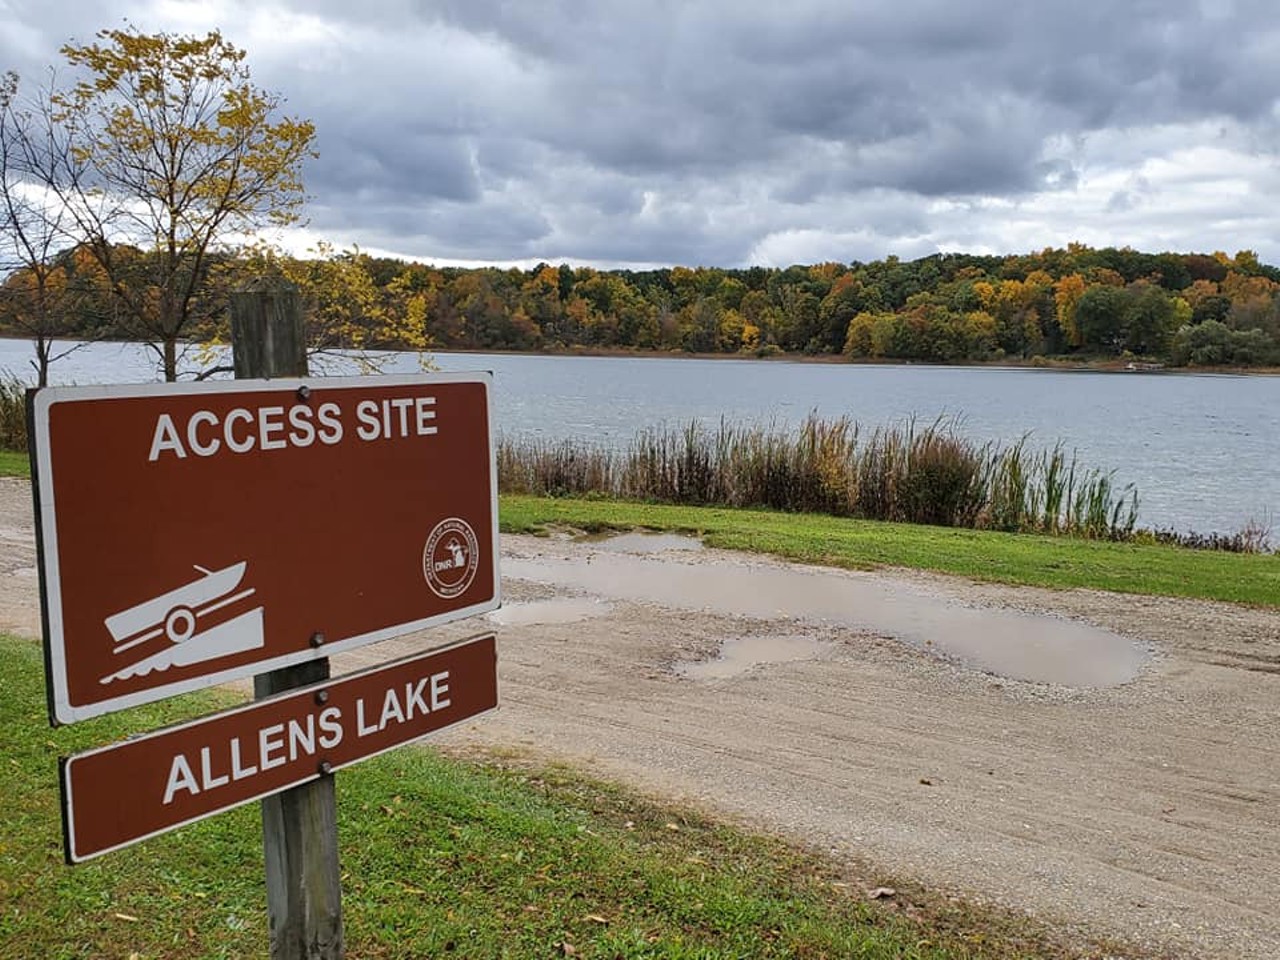 W. J. Hayes State Park
Onsted; 1 hour, 17 minutes
Nestled within the gorgeous Irish Hills, Hayes offers visitors more than just a beach. Come for the shore, stay for the wide range of activities and facilities. Recreation passport required.
Photo via  W.J. Hayes State Park/Facebook